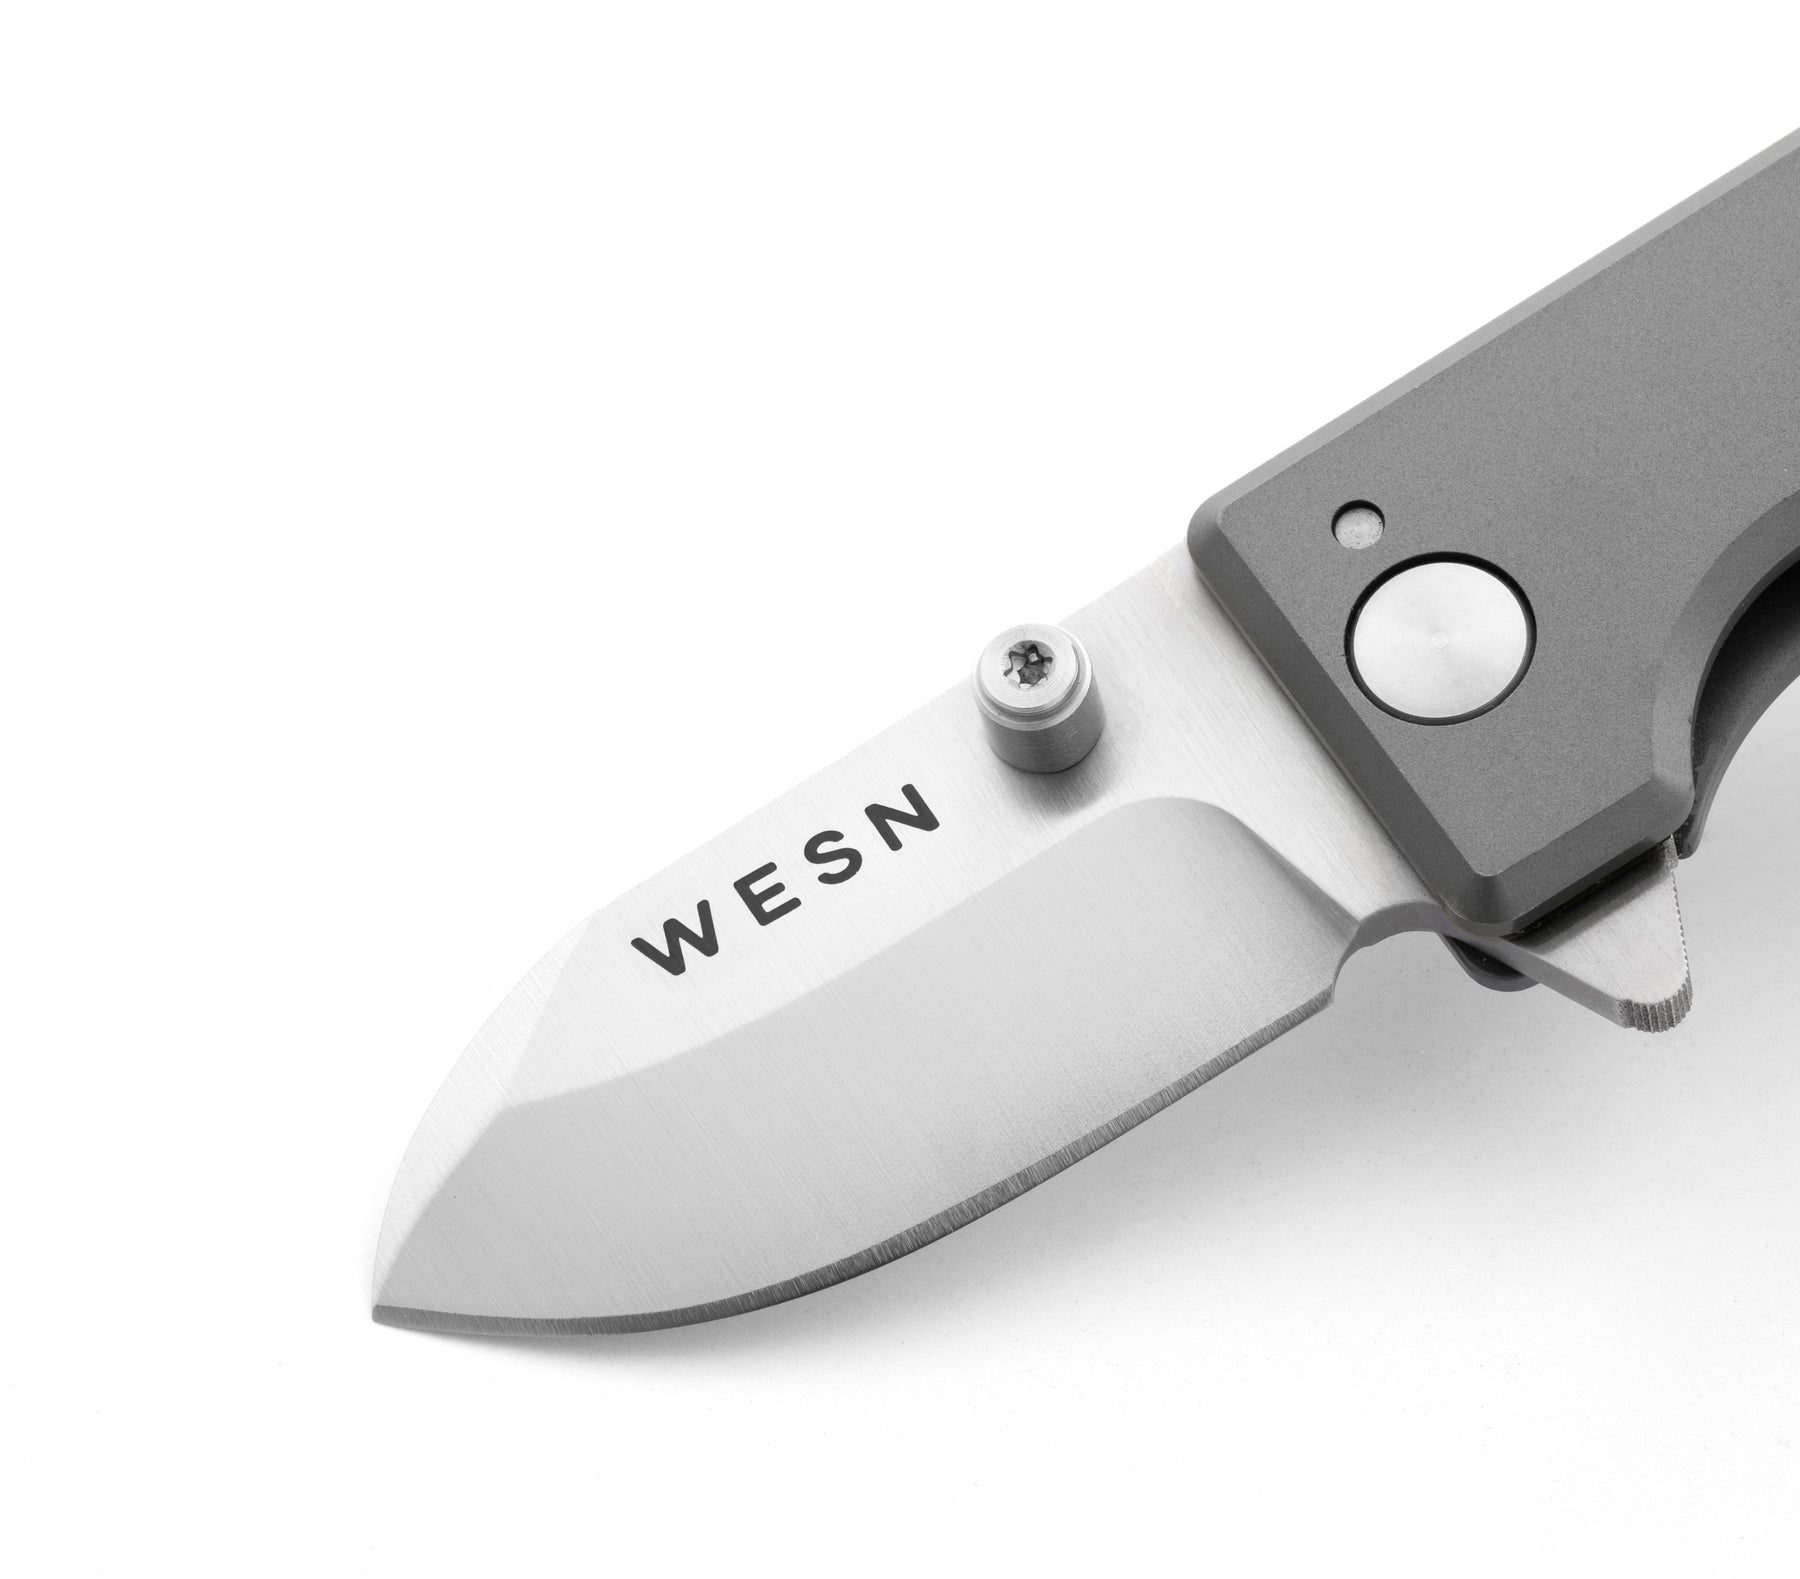 The WESN Microblade Keychain Pocket Knife